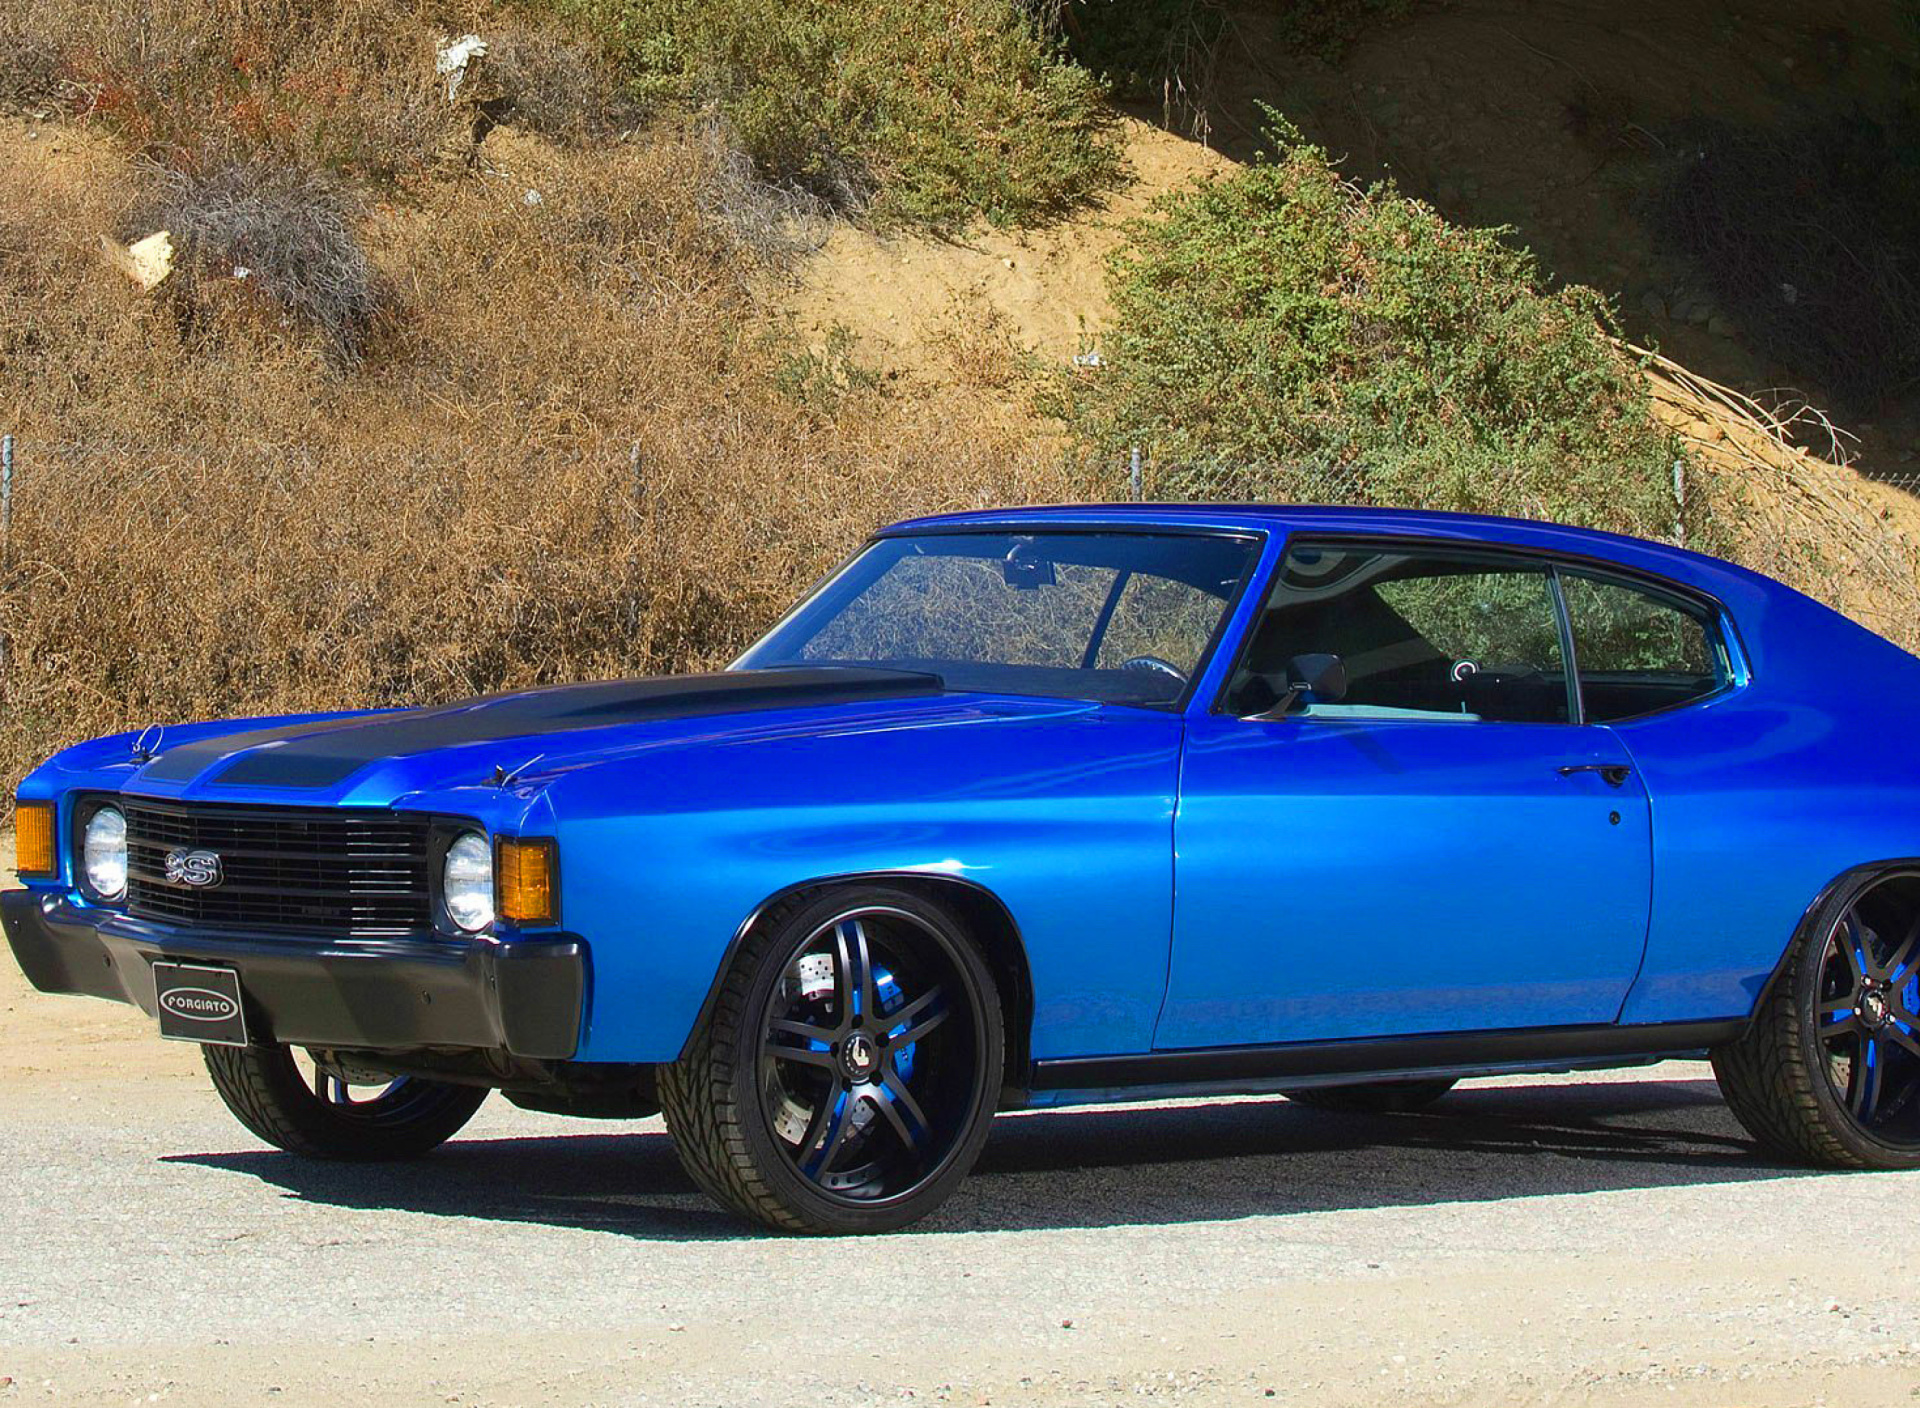 1972 Chevrolet Chevelle SS Coupe wallpaper 1920x1408